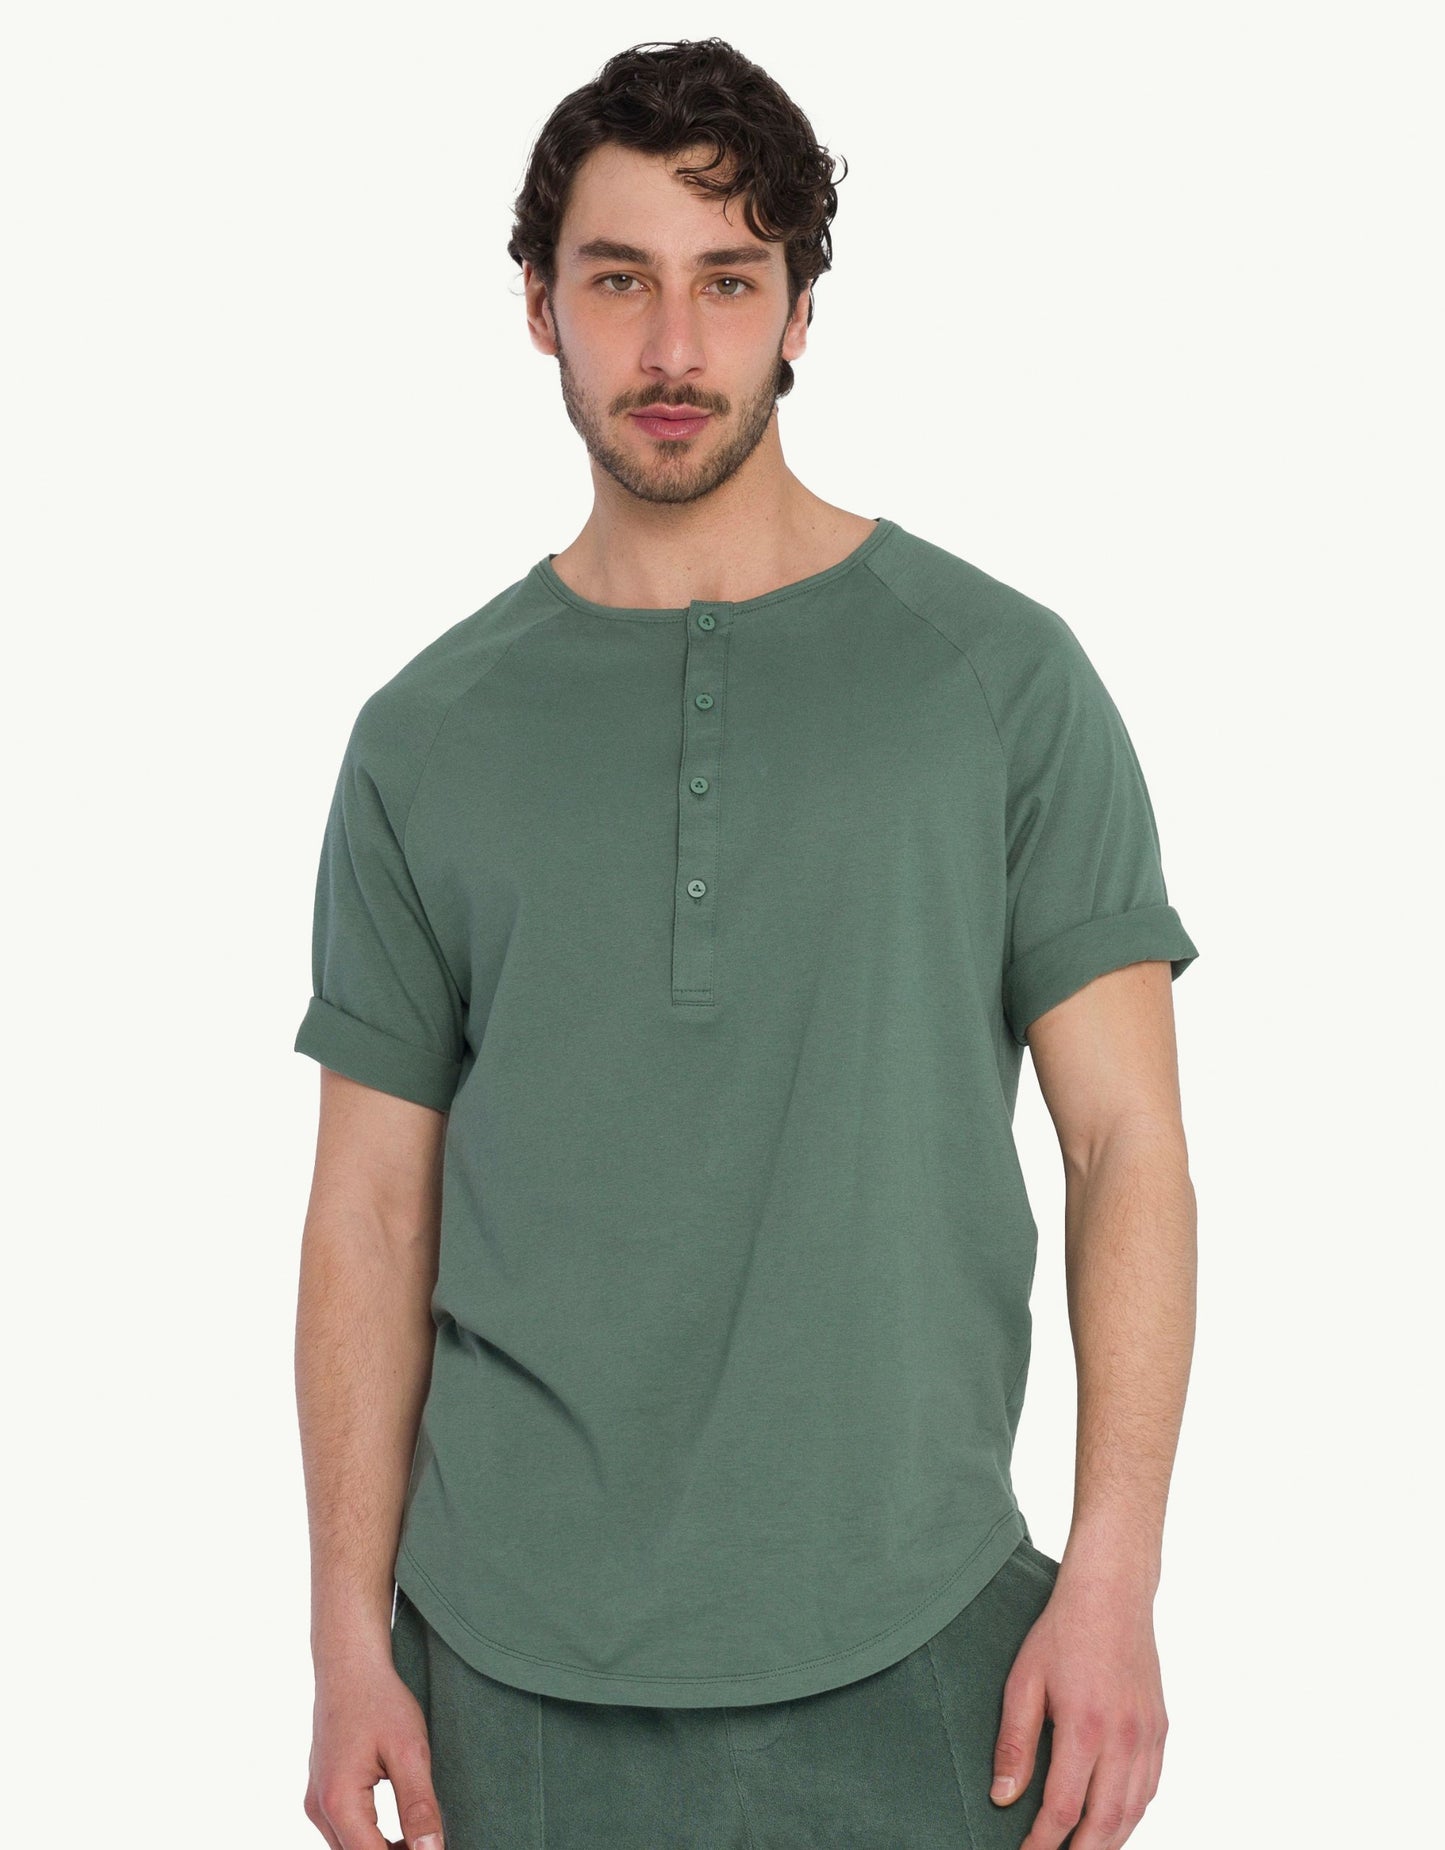 Discover sustainable fashion for men with our Jungle T-shati. Half-sleeve polo t-shirt in green color. Crafted for everyday luxury, our tees provide unmatched softness and all-day comfort. Stay cool in our breathable organic cotton tees for men, made from 100% organic cotton to champion sustainability and skin-friendly choices.